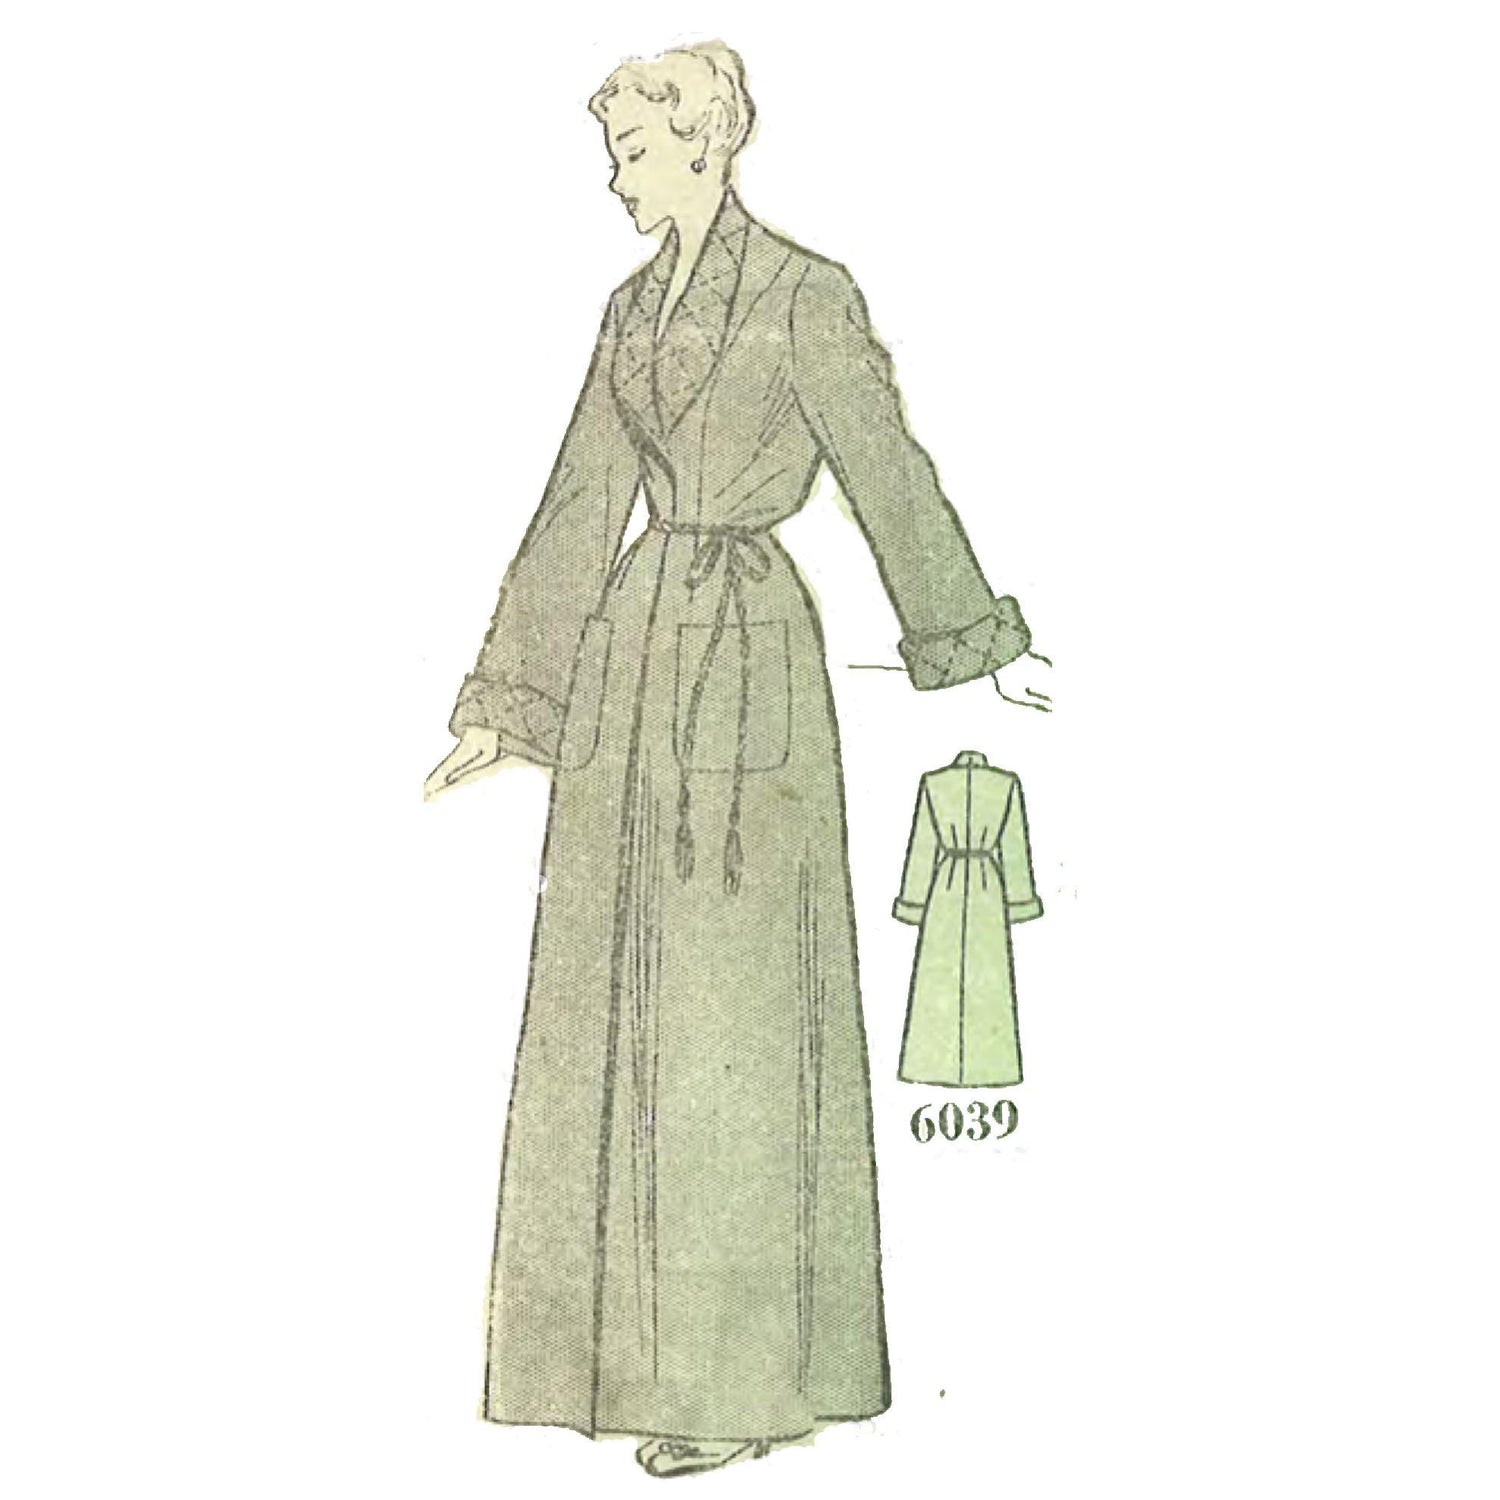 Womens Dressing Gown Robe Housecoat Vintage 1940s Sewing Pattern   Vintage Sewing Pattern Company